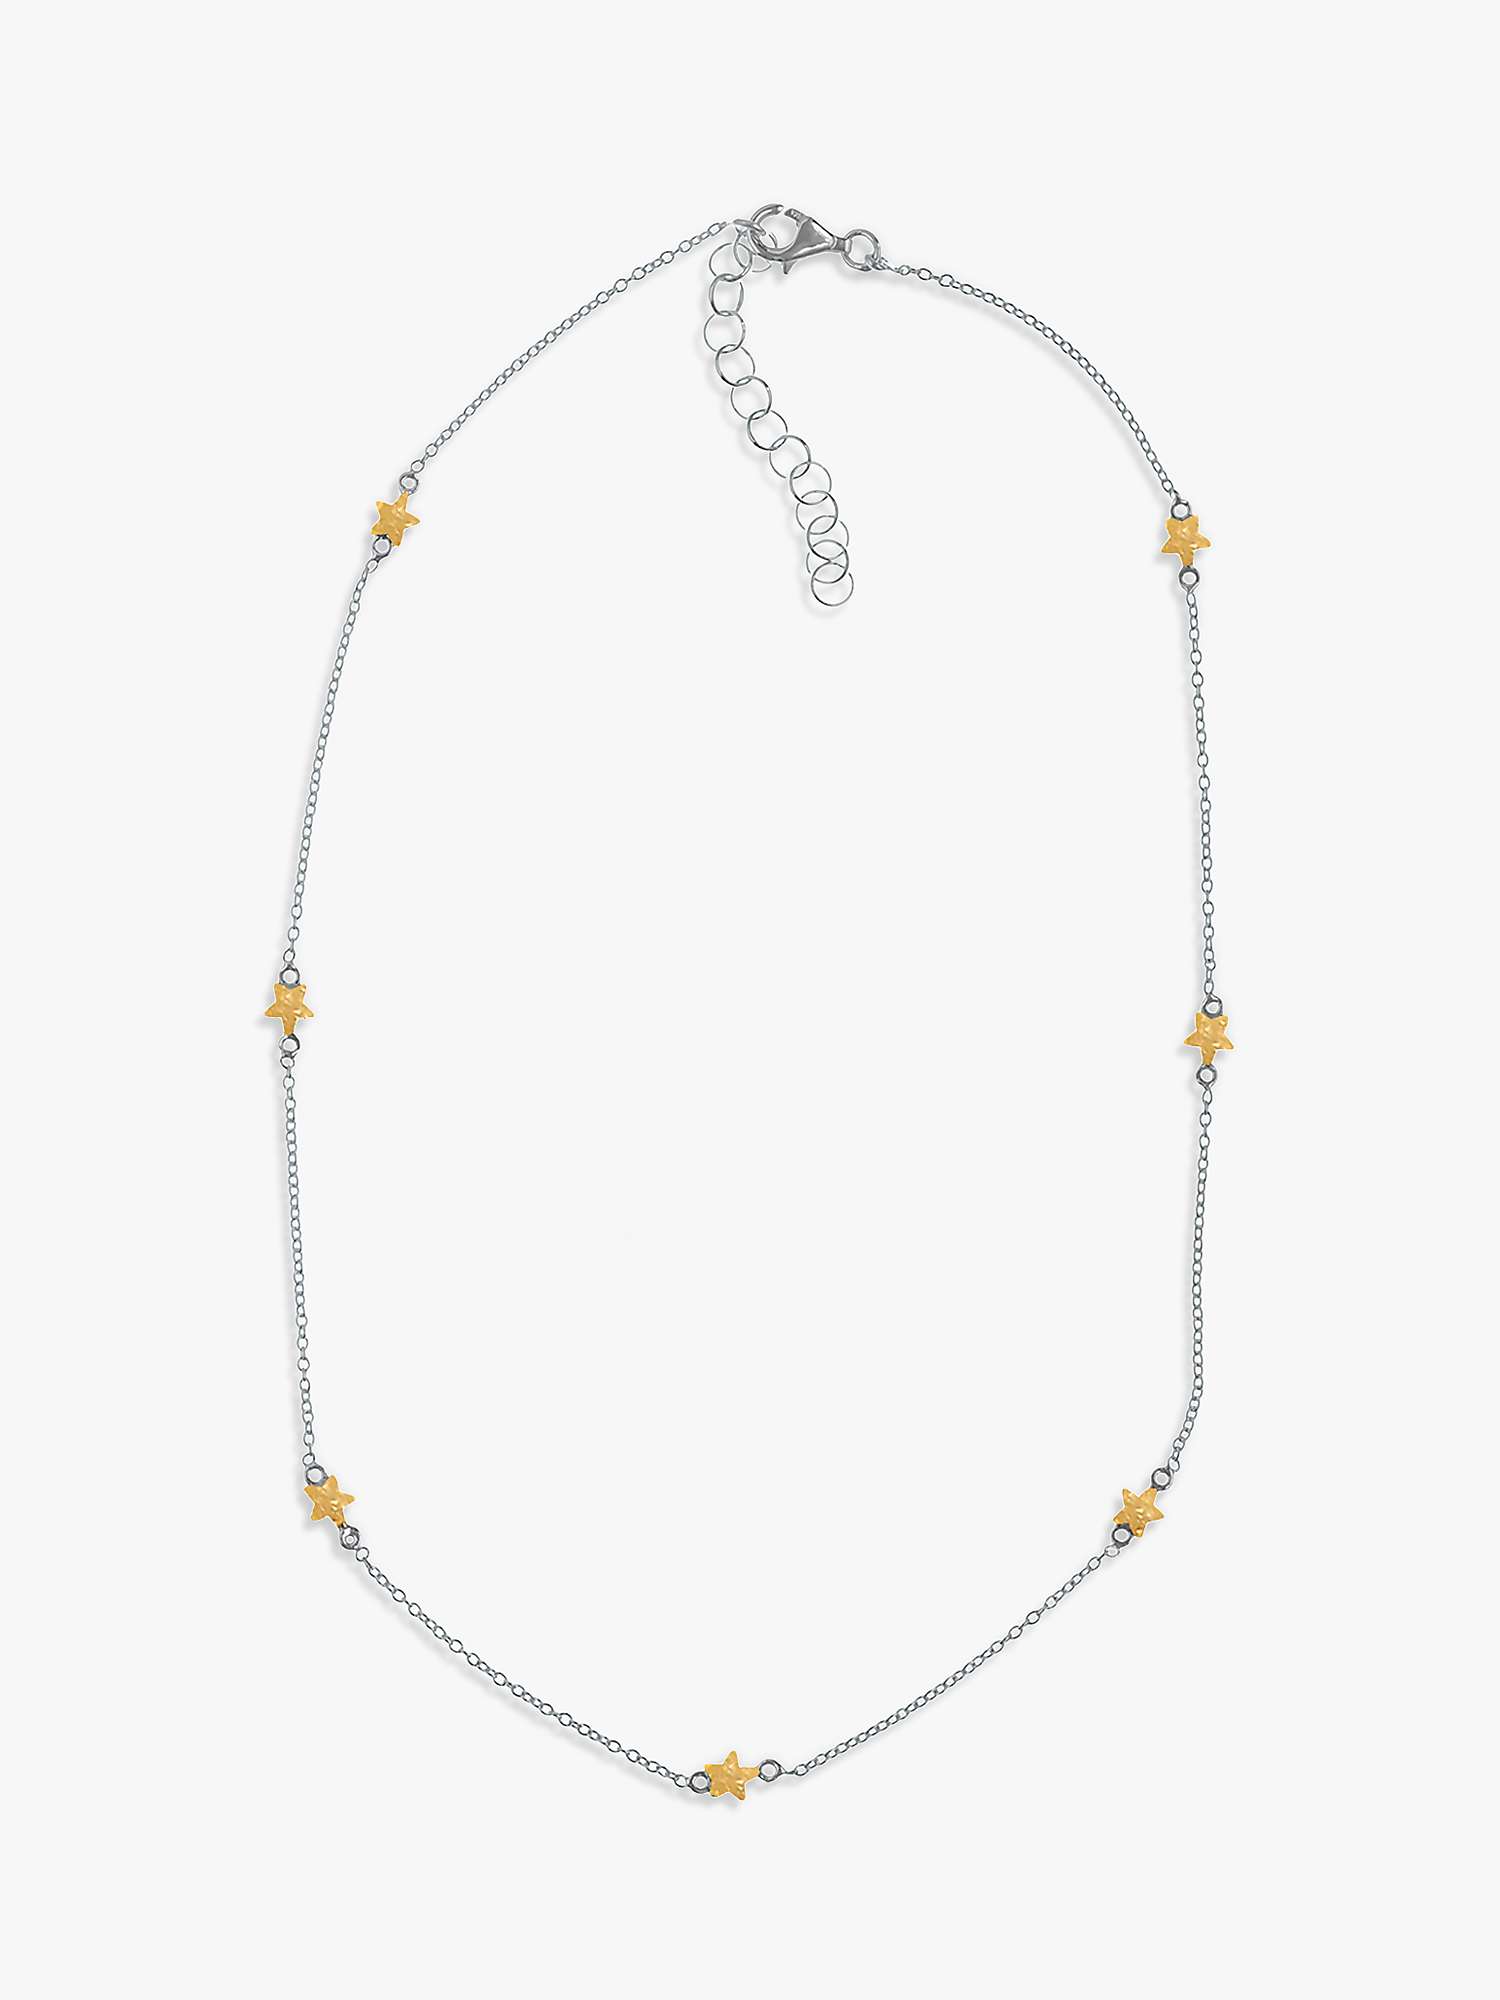 Buy Nina B Two-Tone Star Collar Necklace, Silver/Gold Online at johnlewis.com